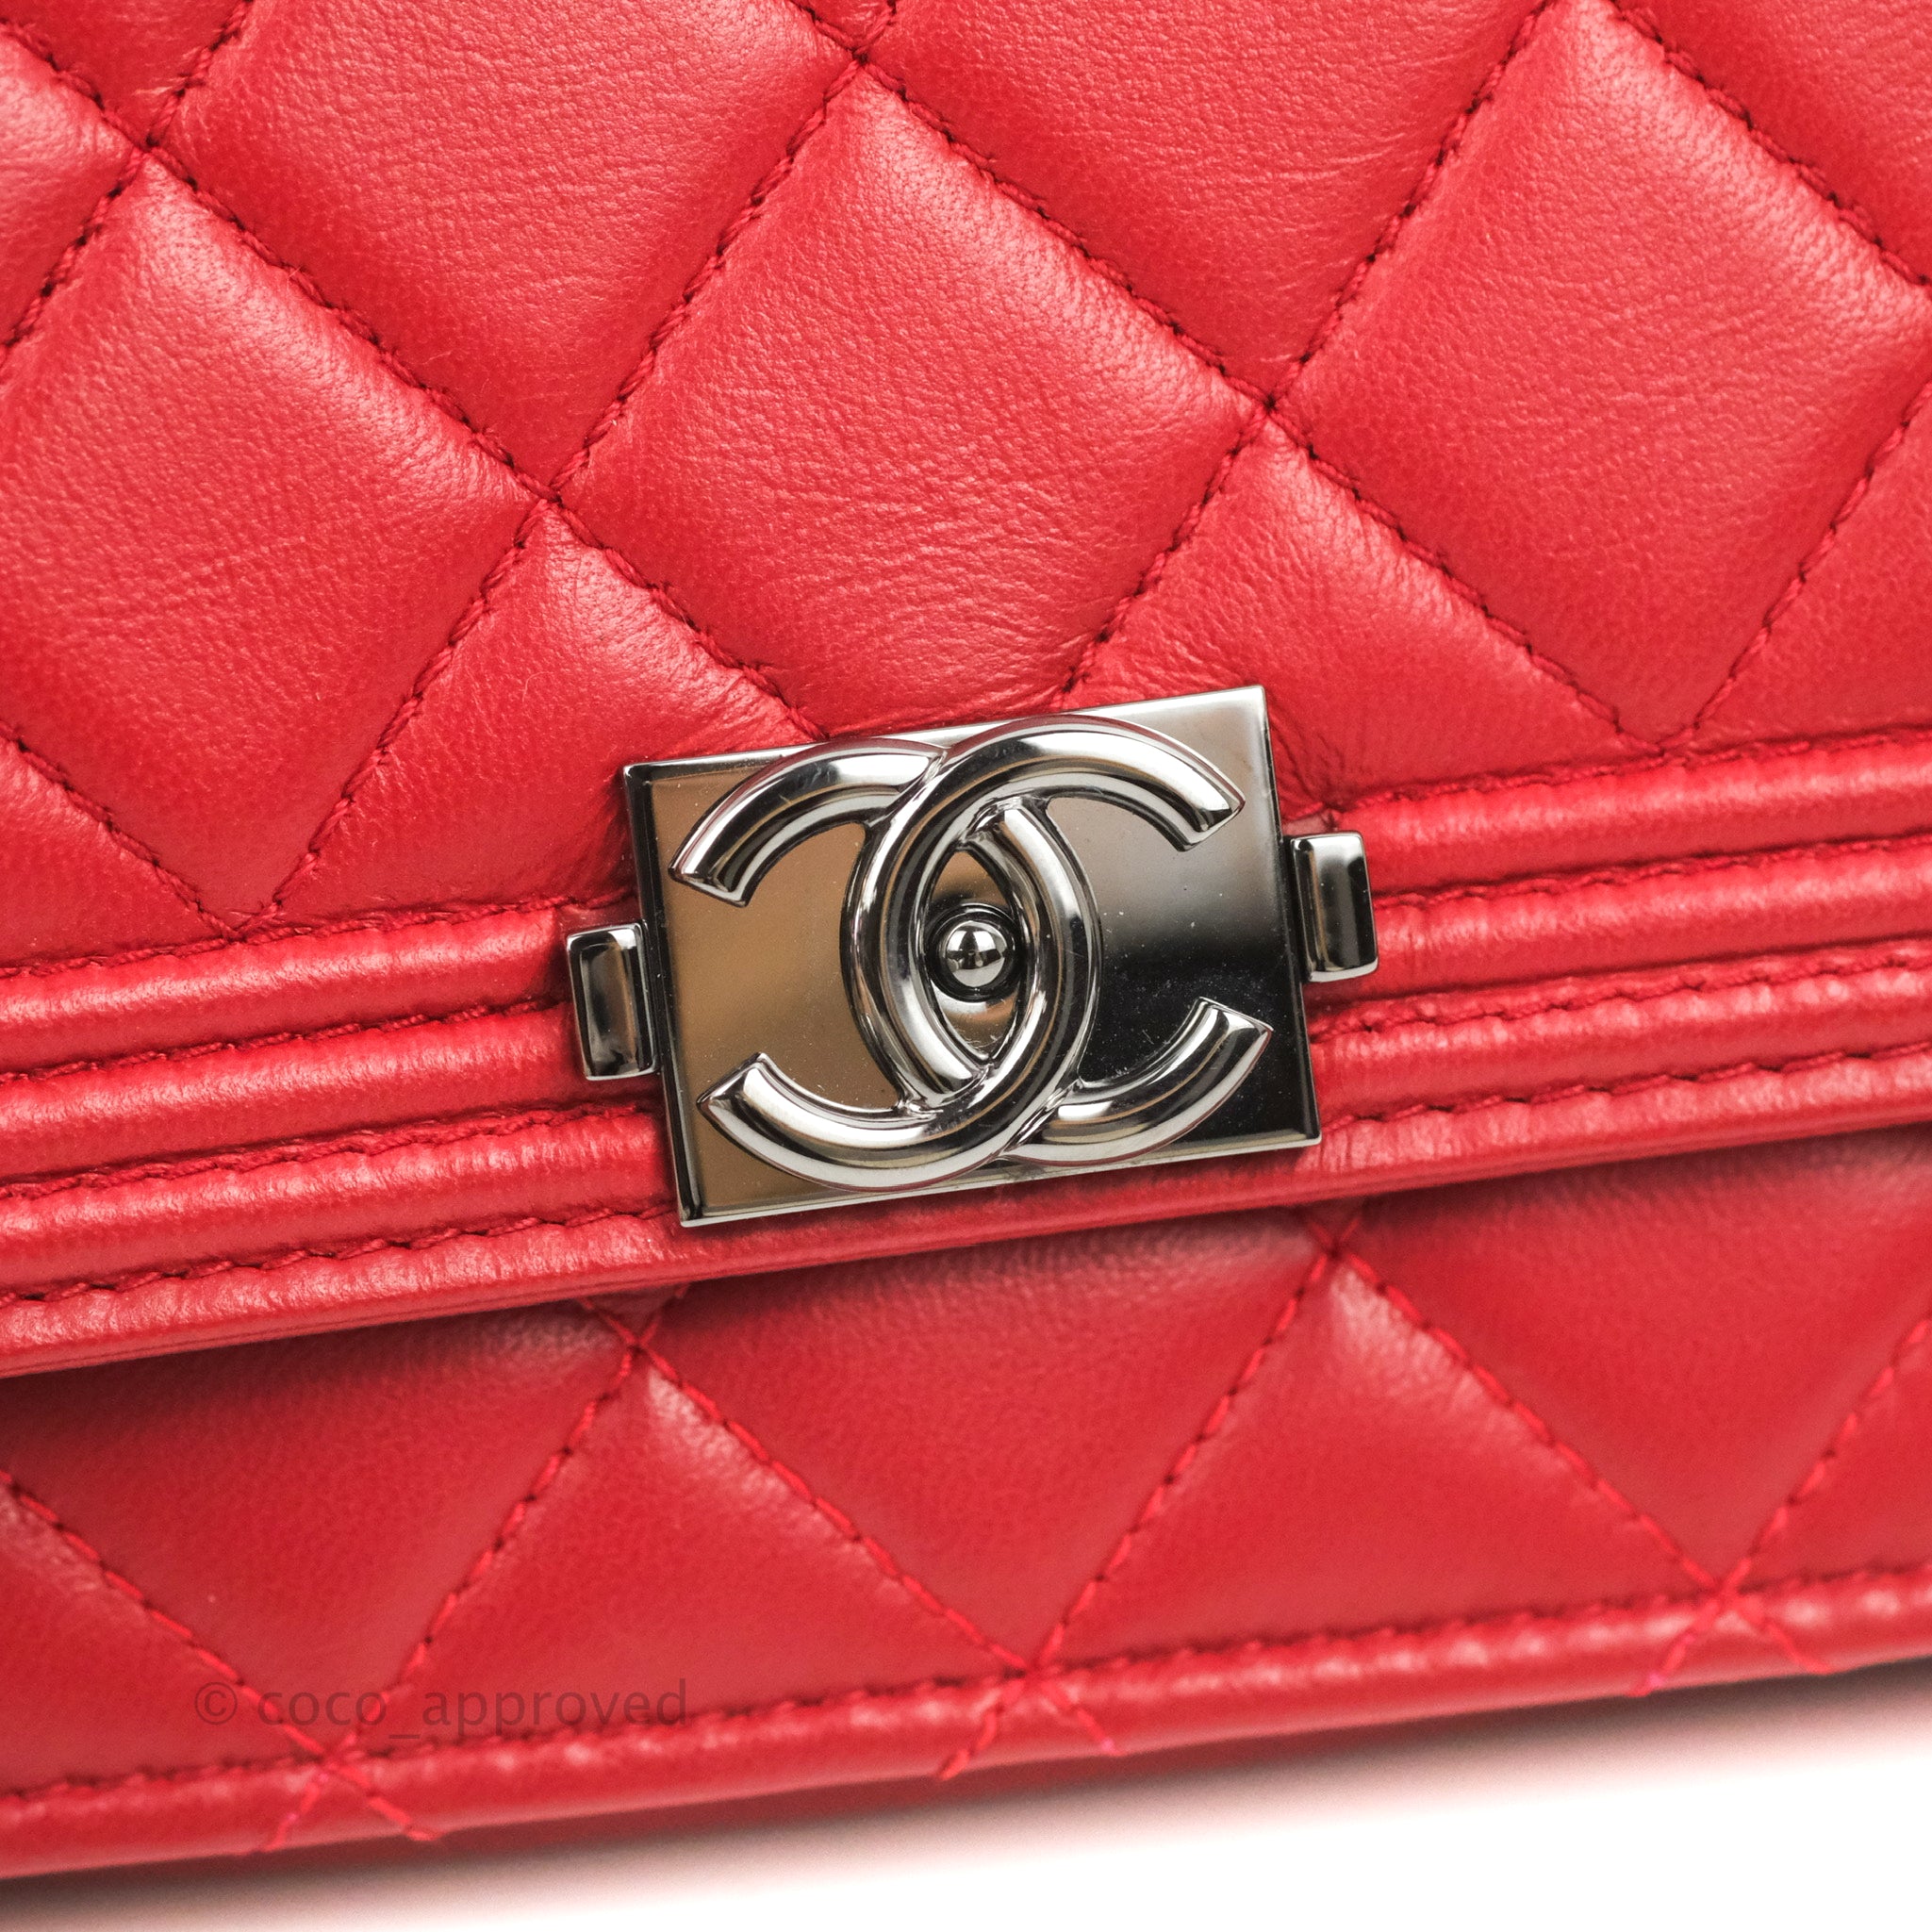 Chanel Quilted Lambskin Pink Wallet On Chain WOC Silver Hardware